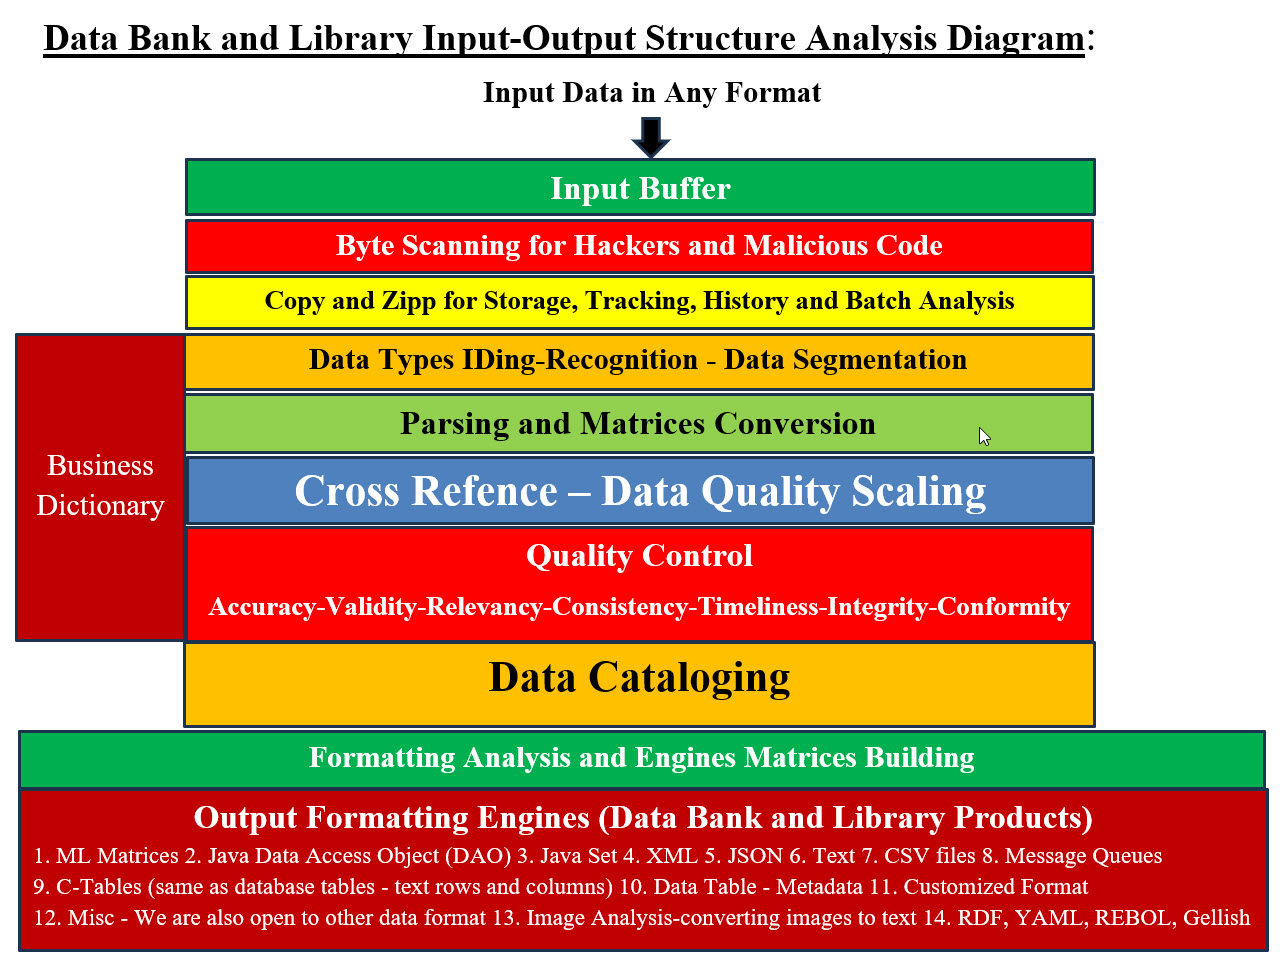 Data Bank and Library Input-Output Structure Analysis Diagram